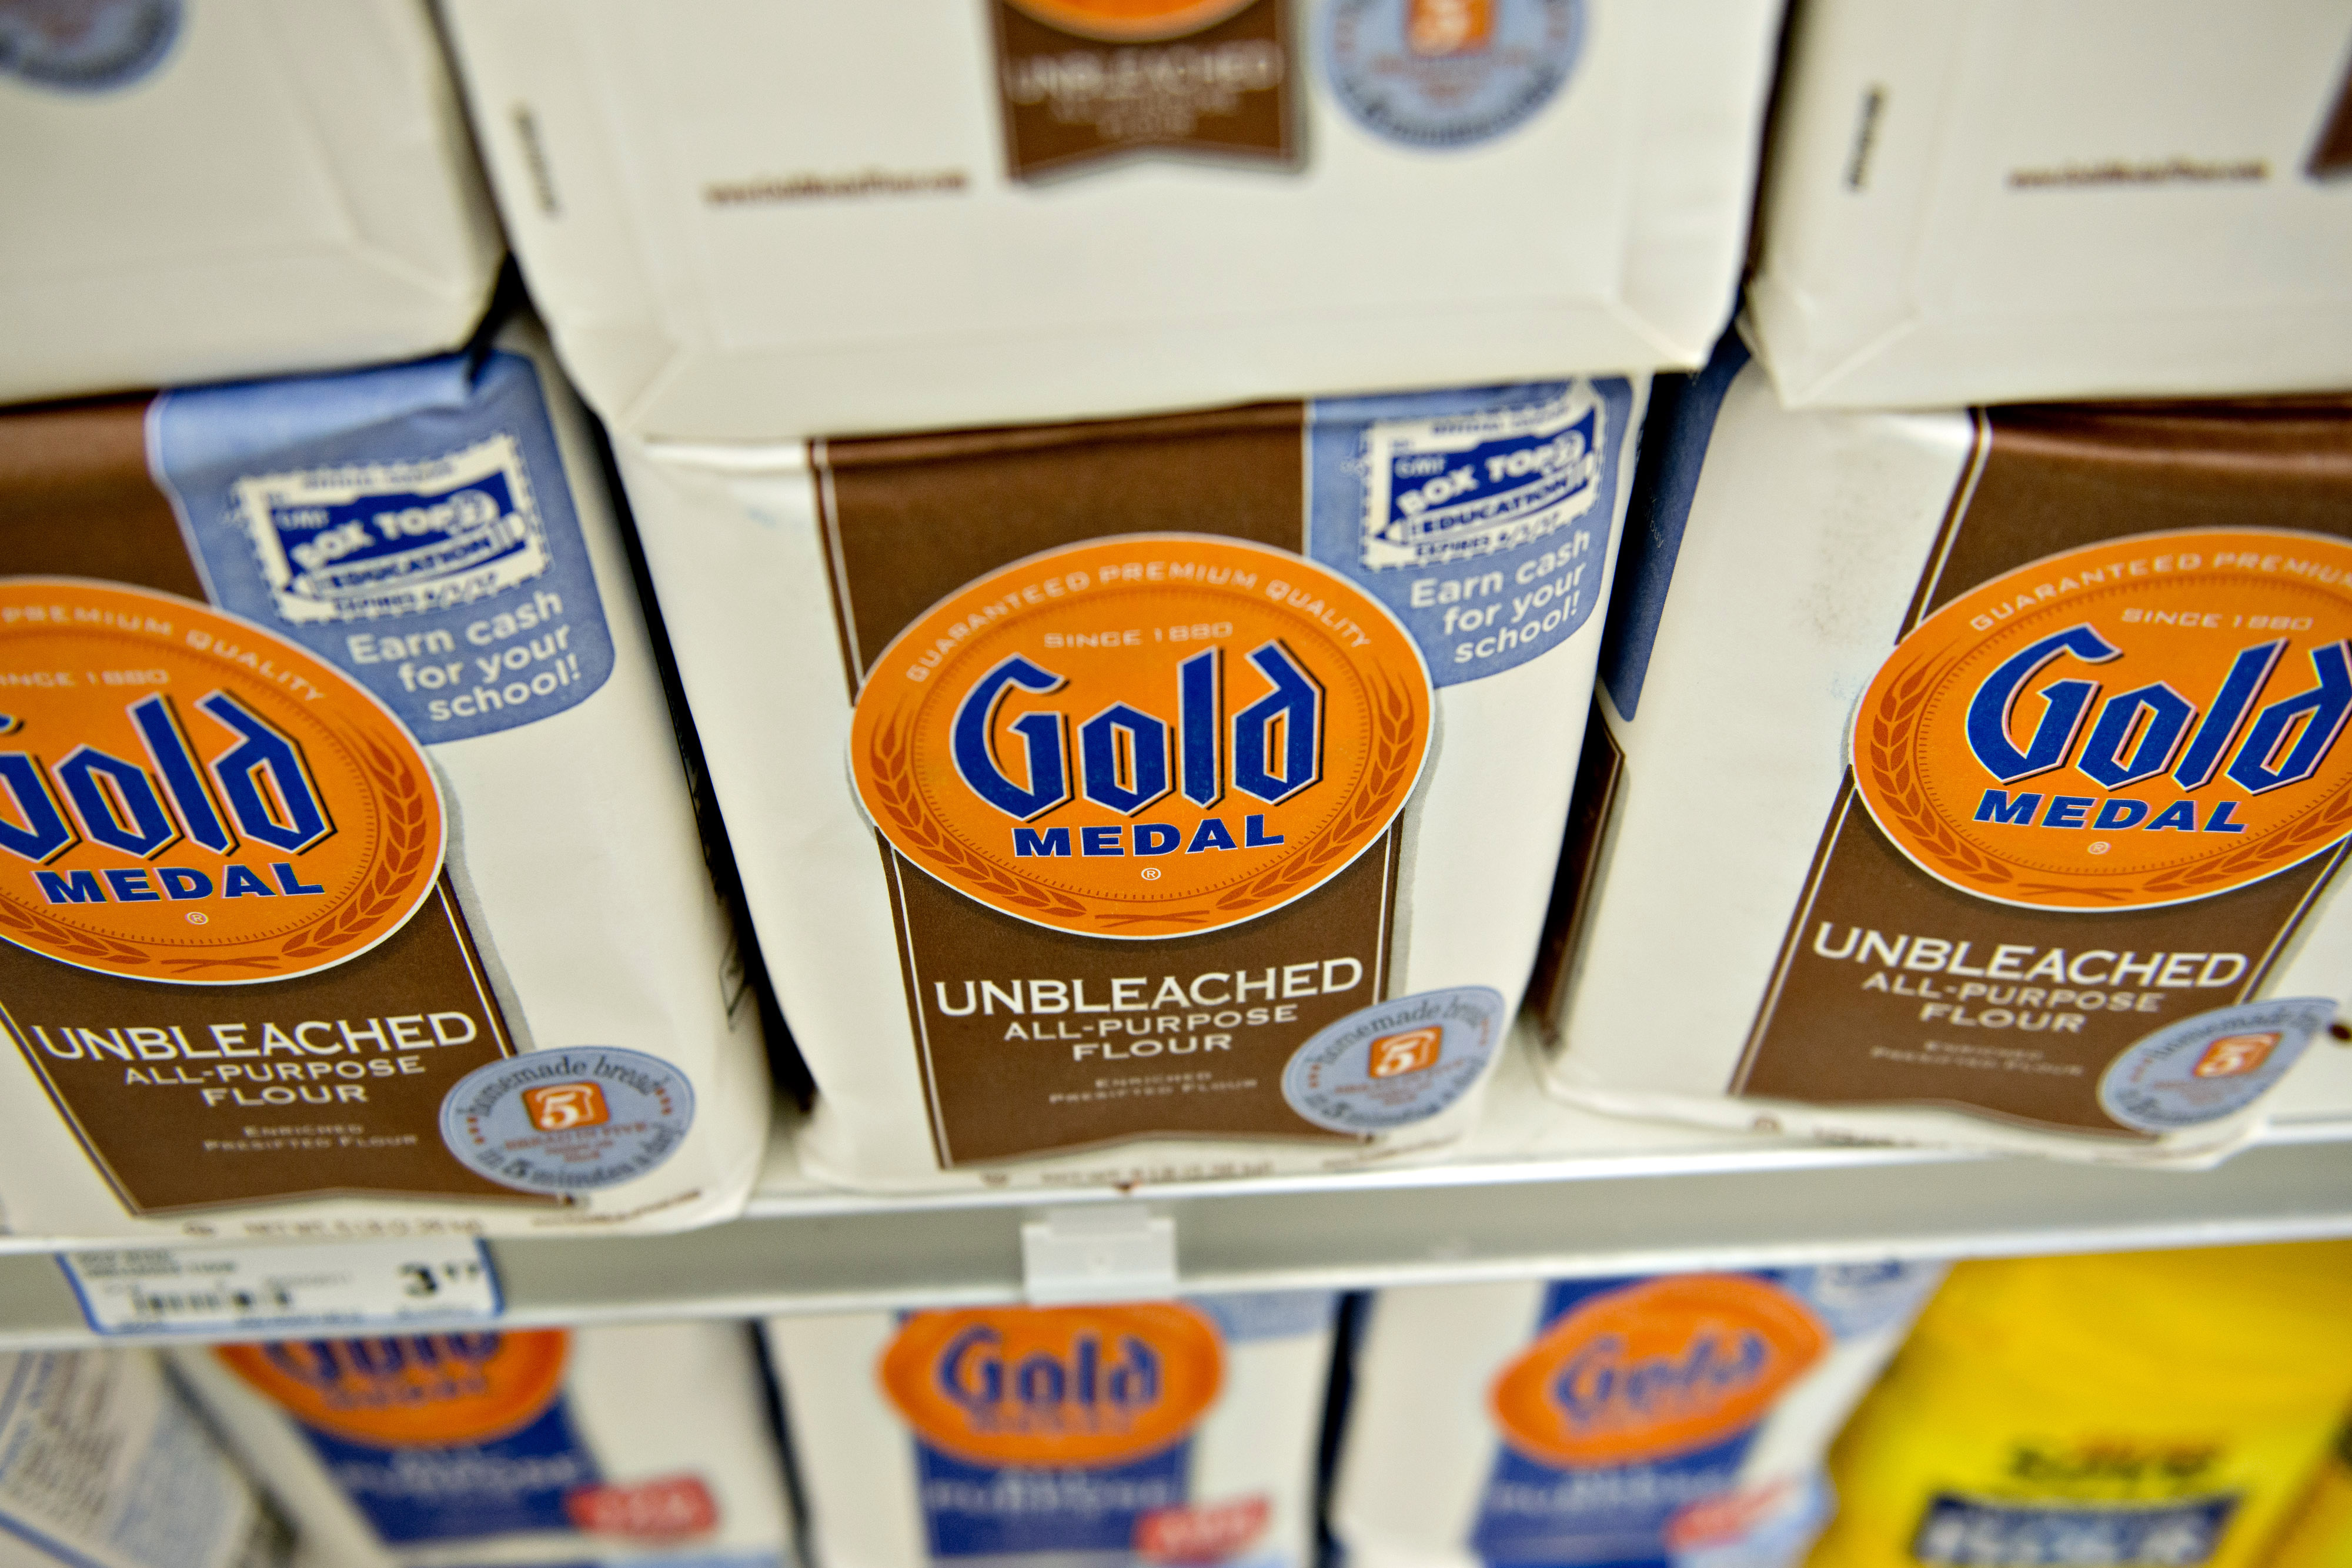 General Mills Inc. Gold Medal flour in Princeton, Ill. on Sept. 17, 2013. (Daniel Acker—Getty Images)